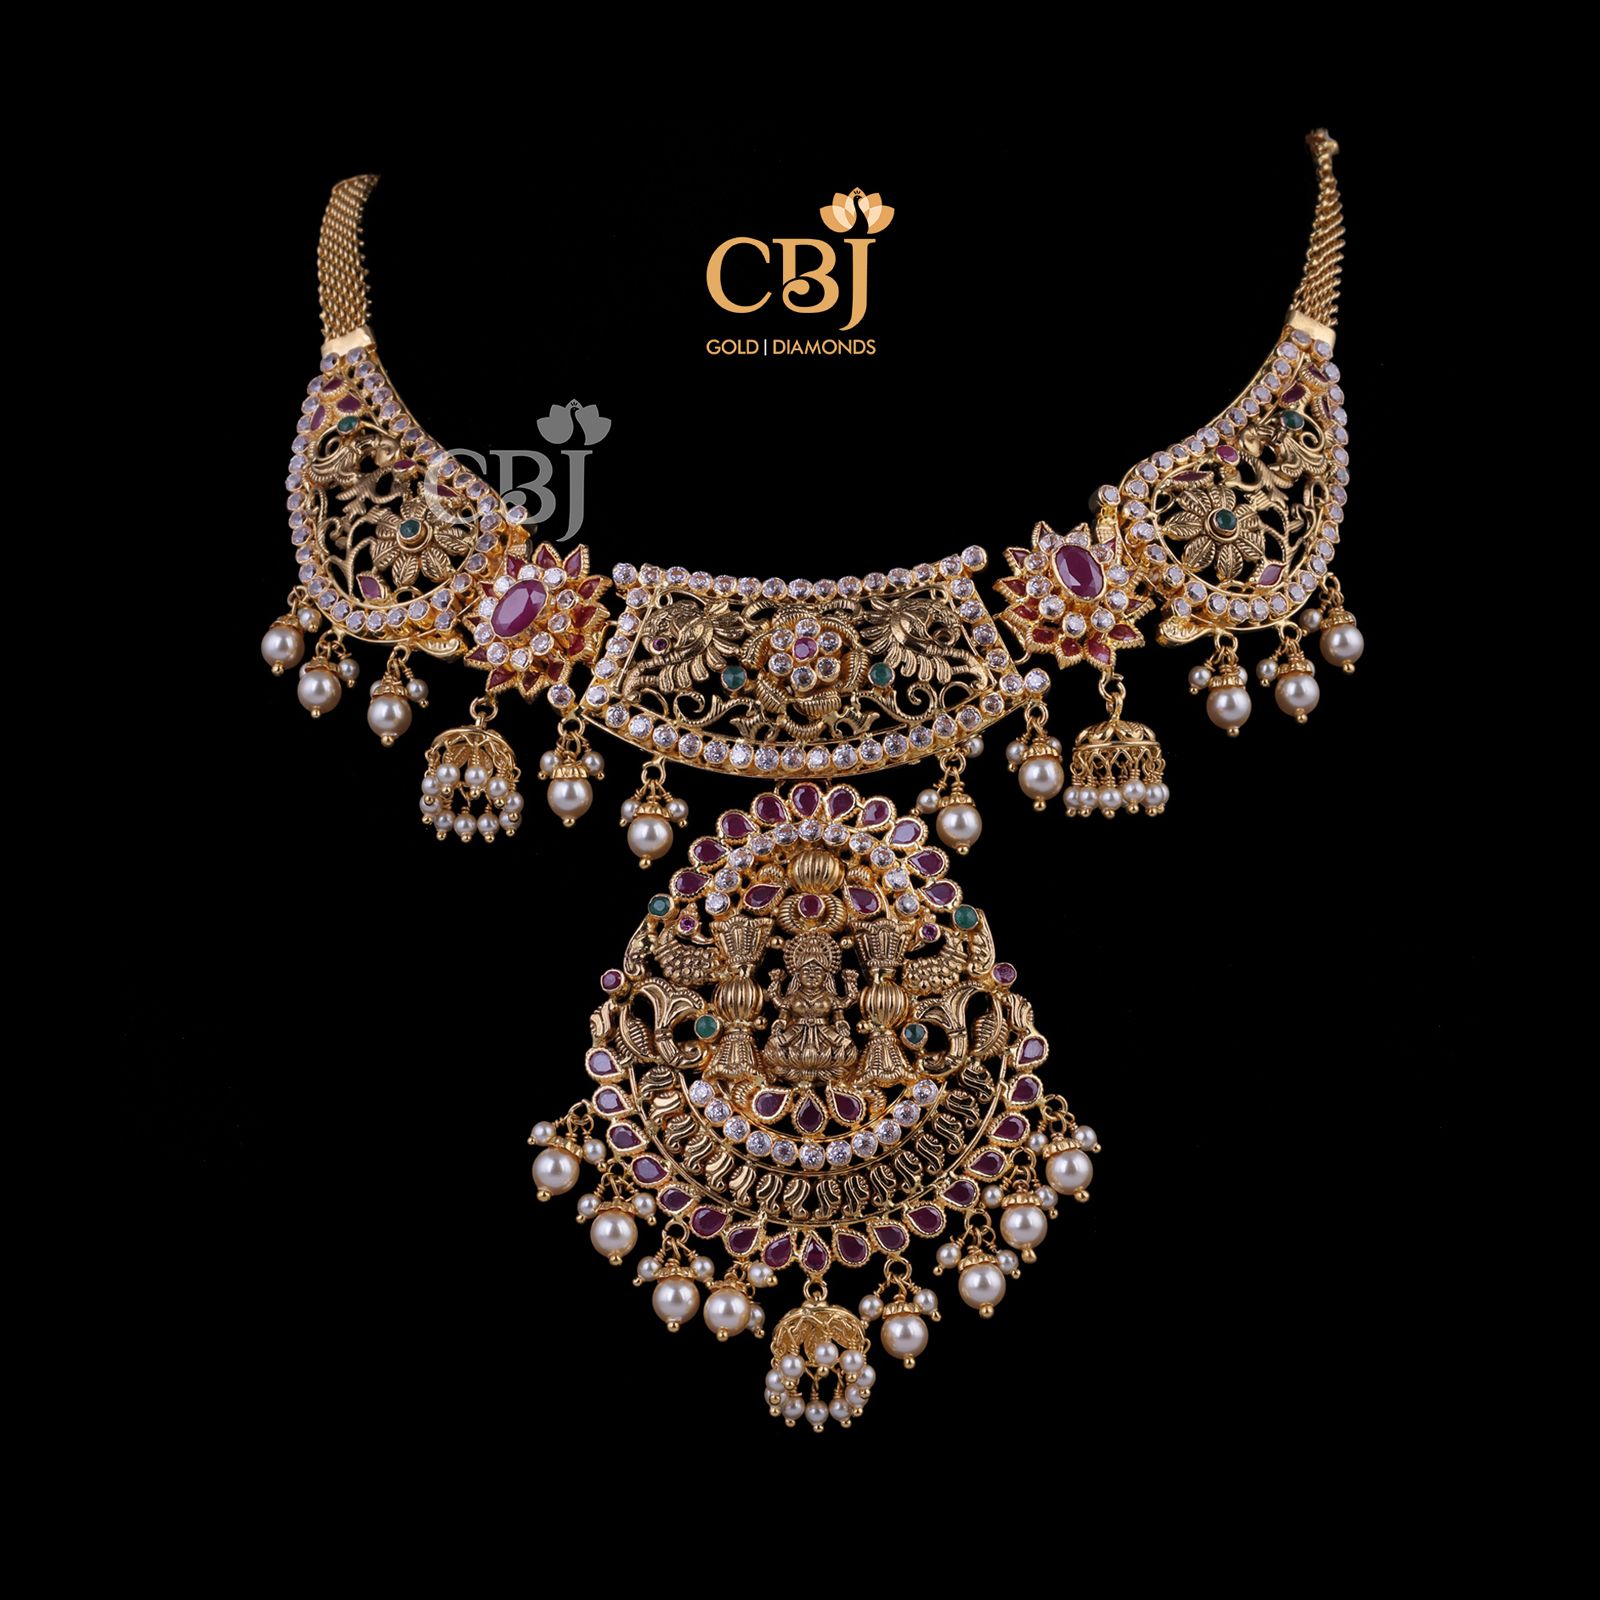 SPE Gold - Mesmerizing Light Weight Gold Necklace Design